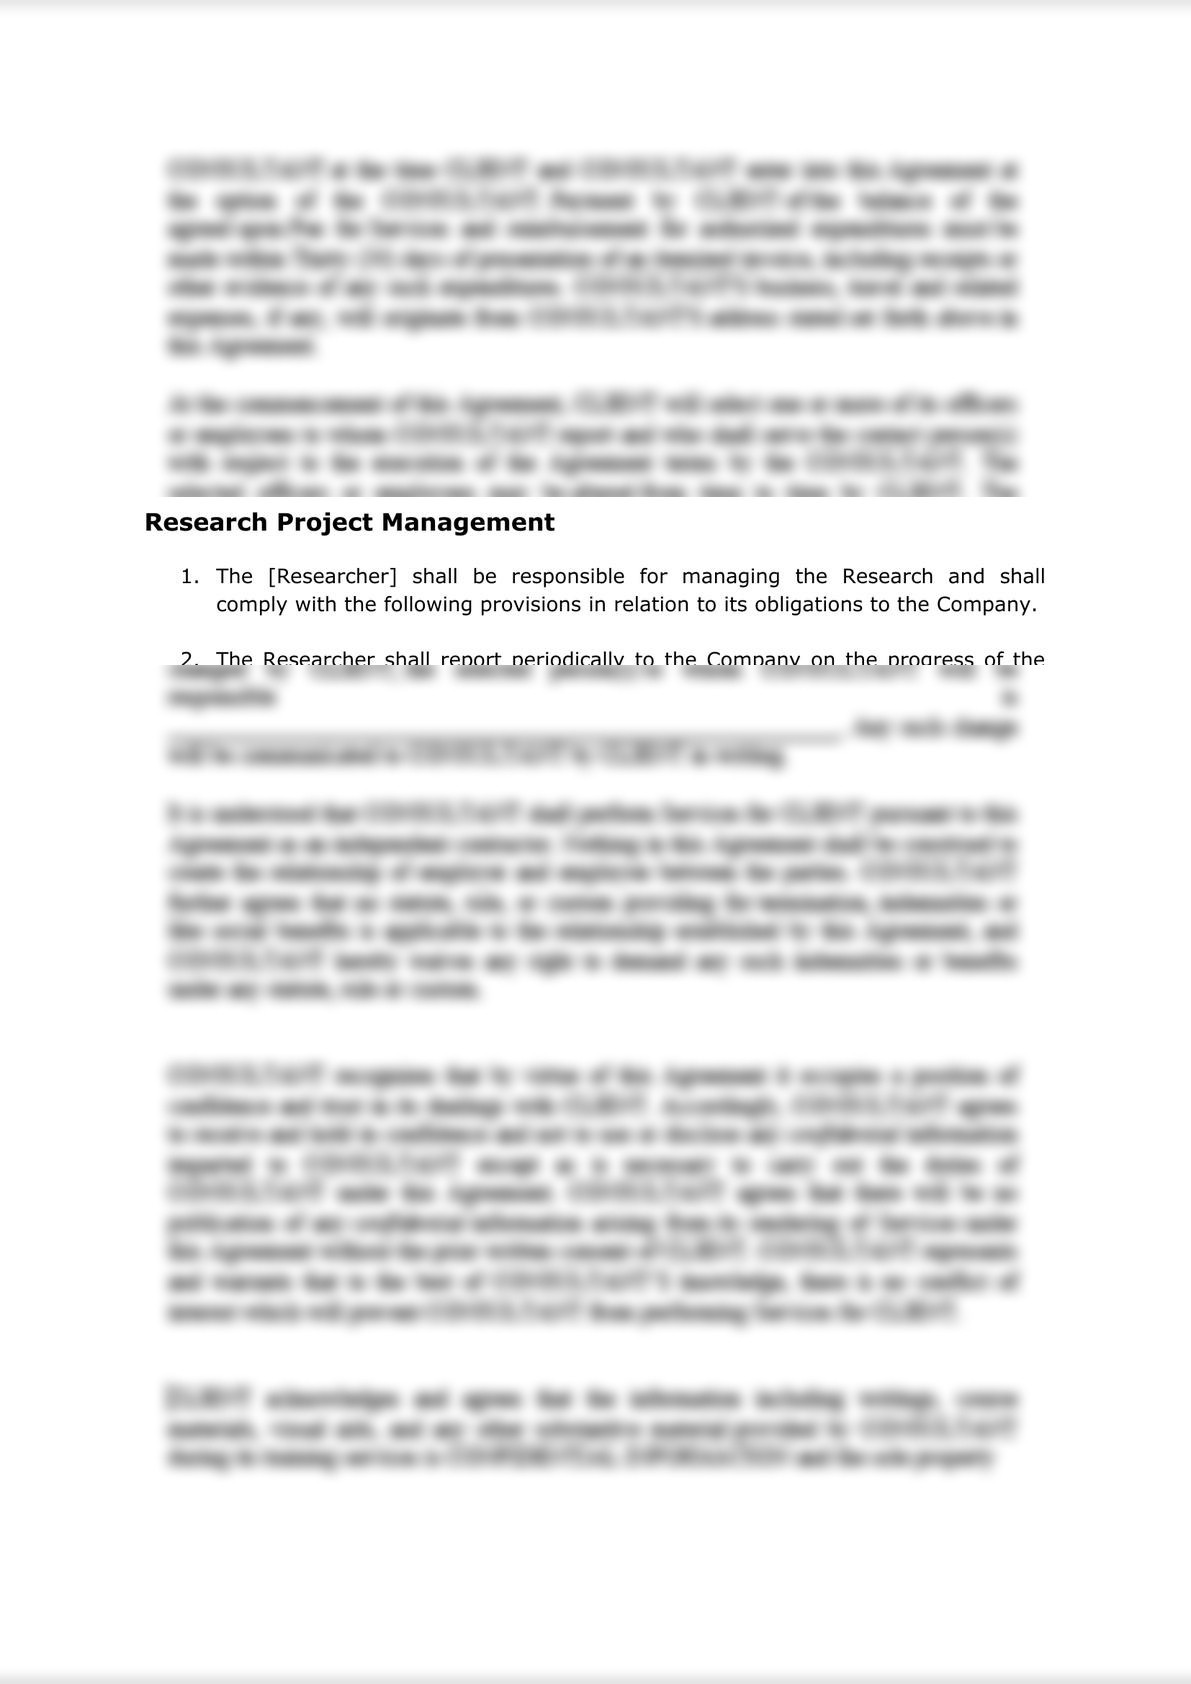 RESEARCH AND DEVELOPMENT AGREEMENT-2